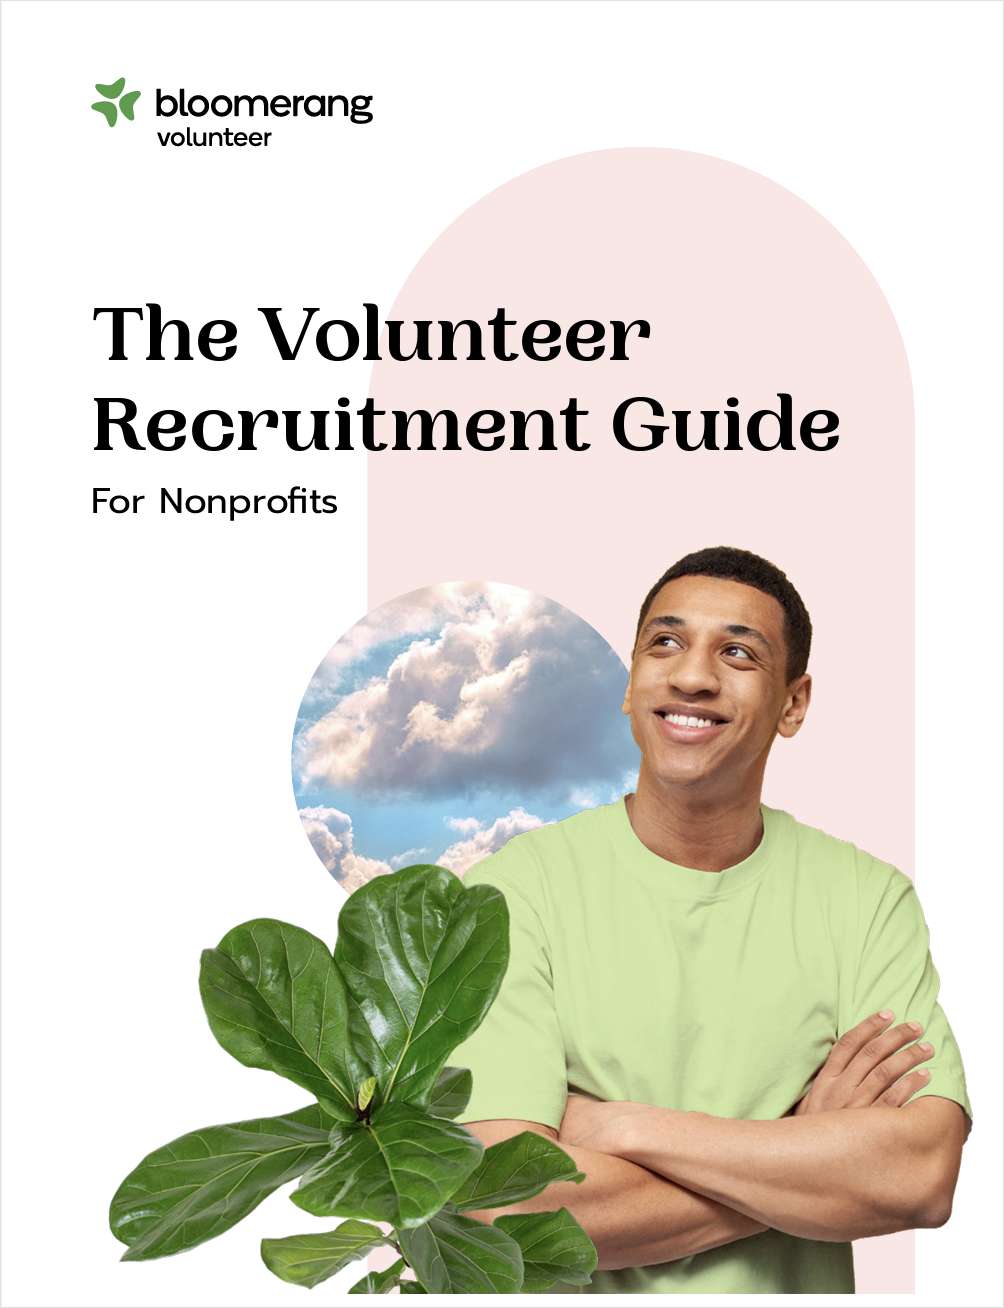 The Volunteer Recruitment Guide For Nonprofits